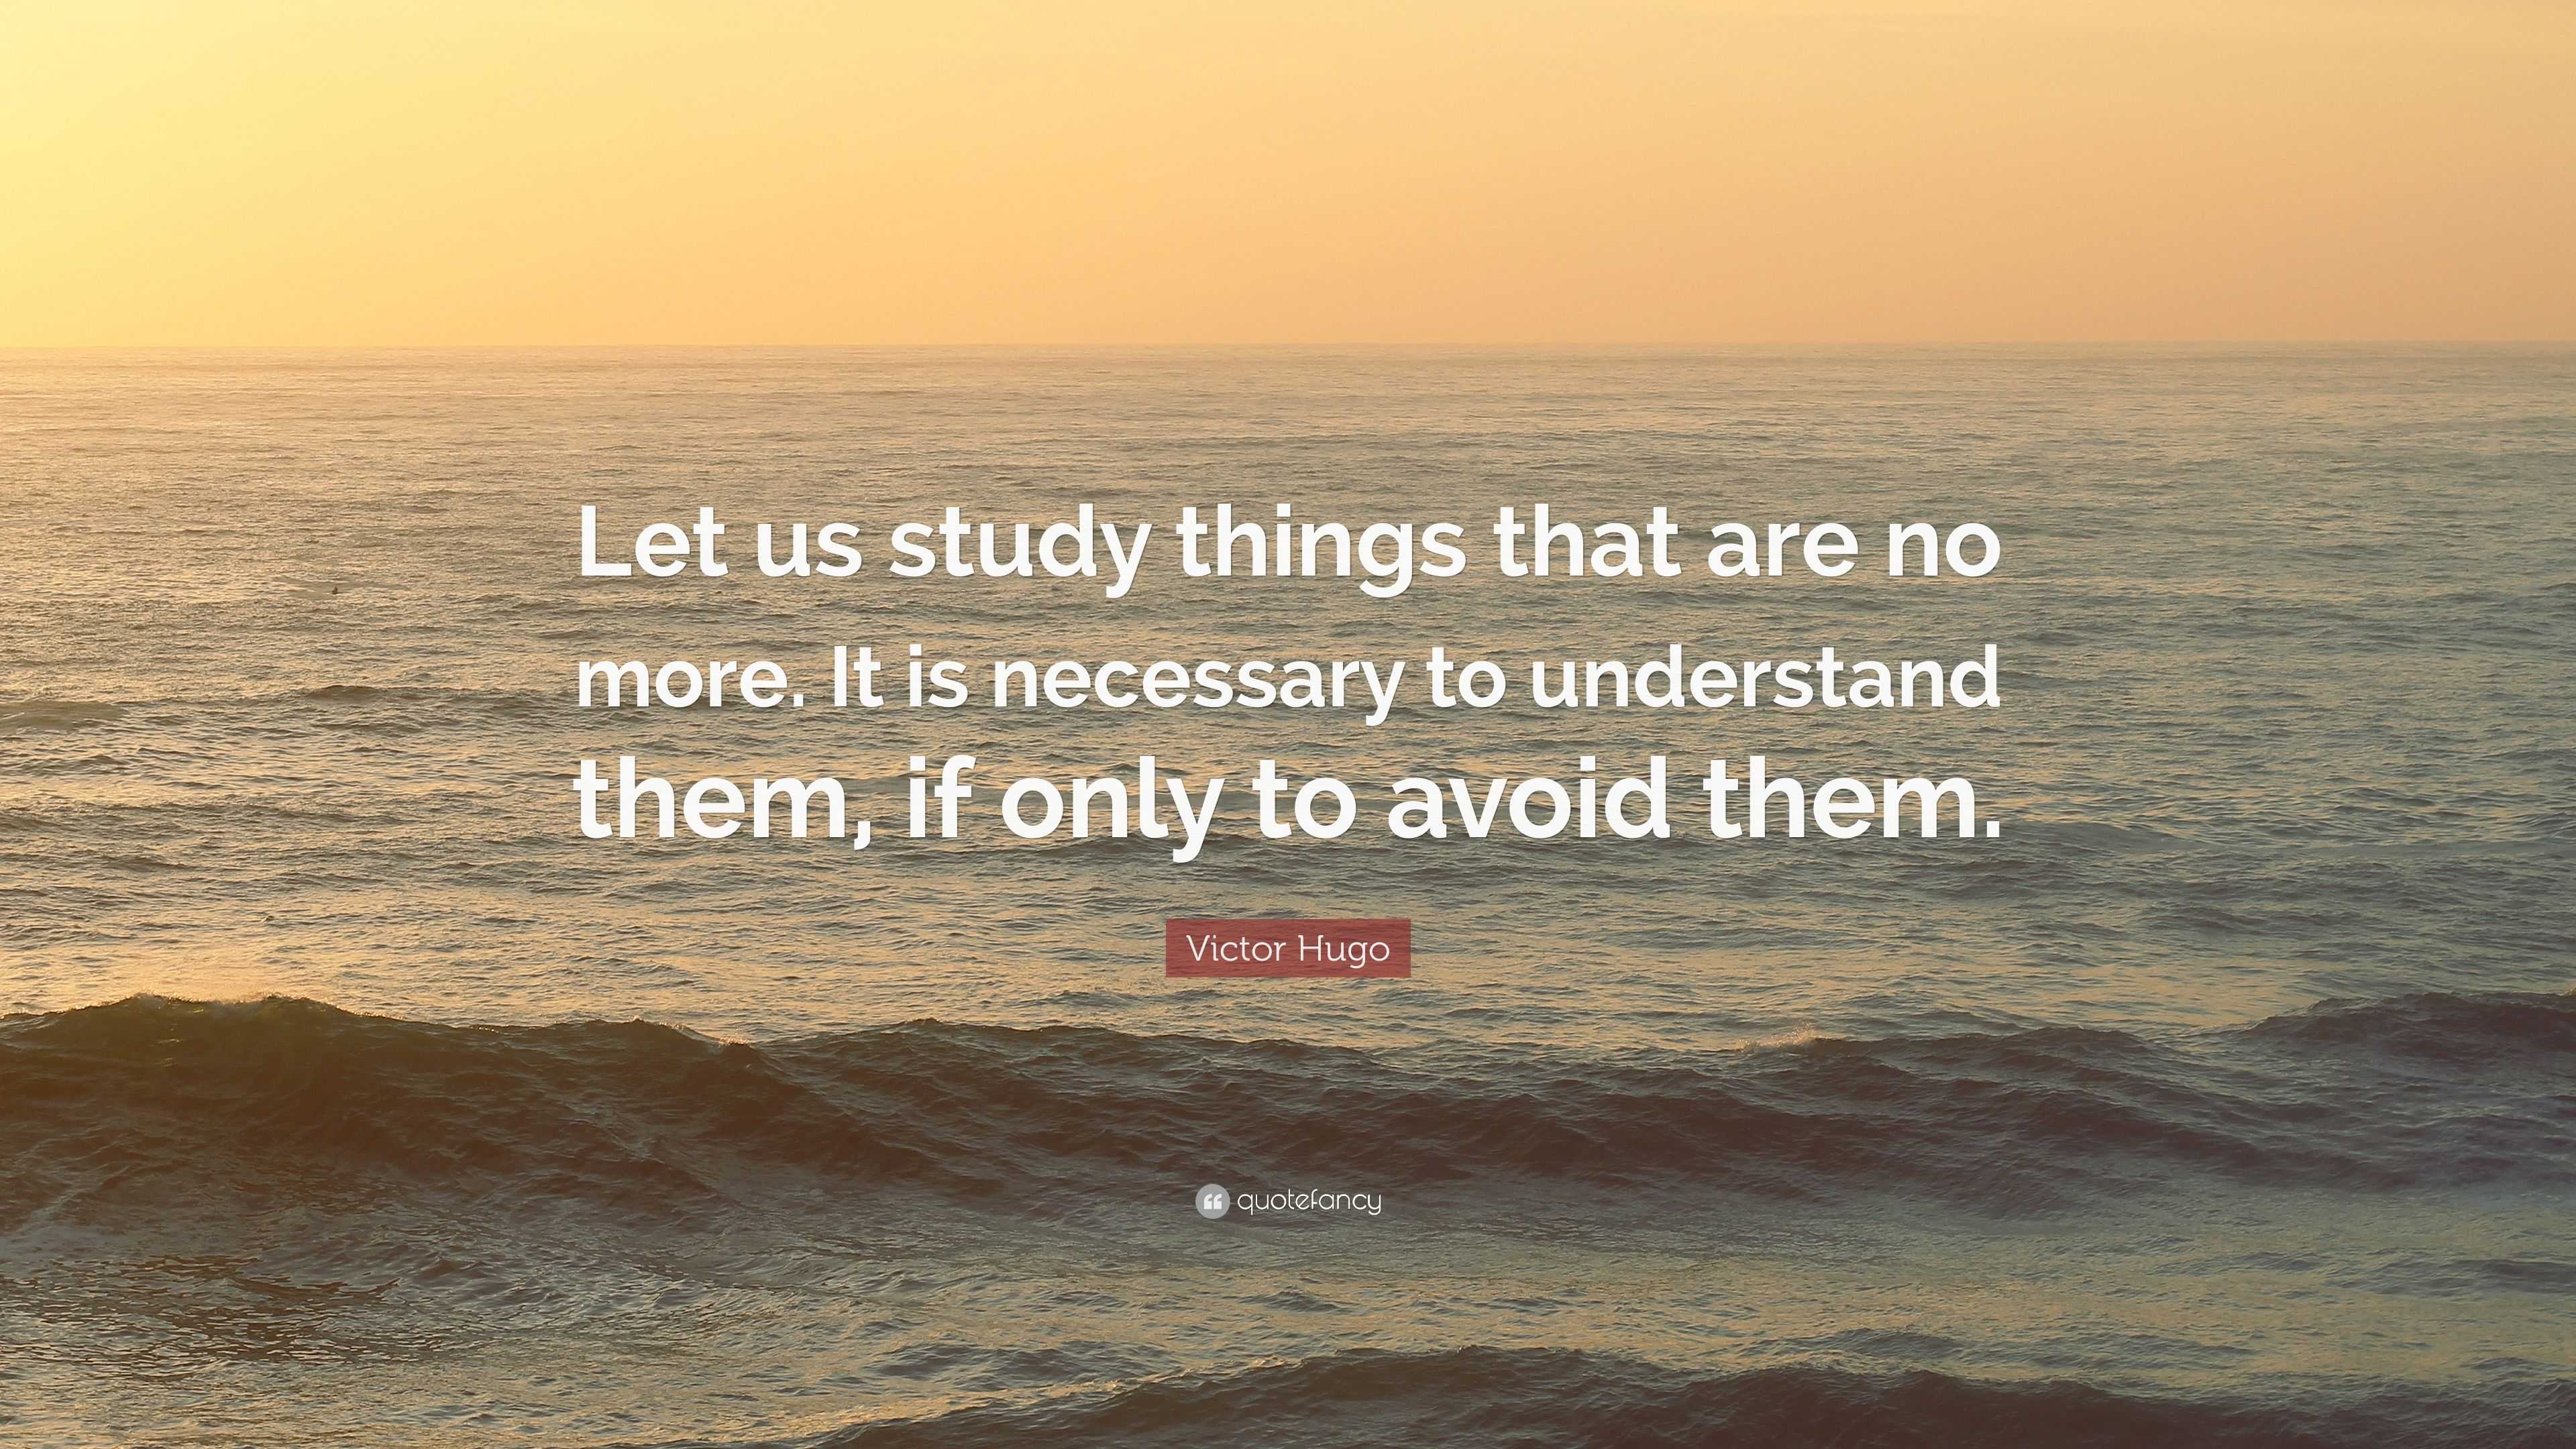 Victor Hugo Quote: “Let us study things that are no more. It is ...